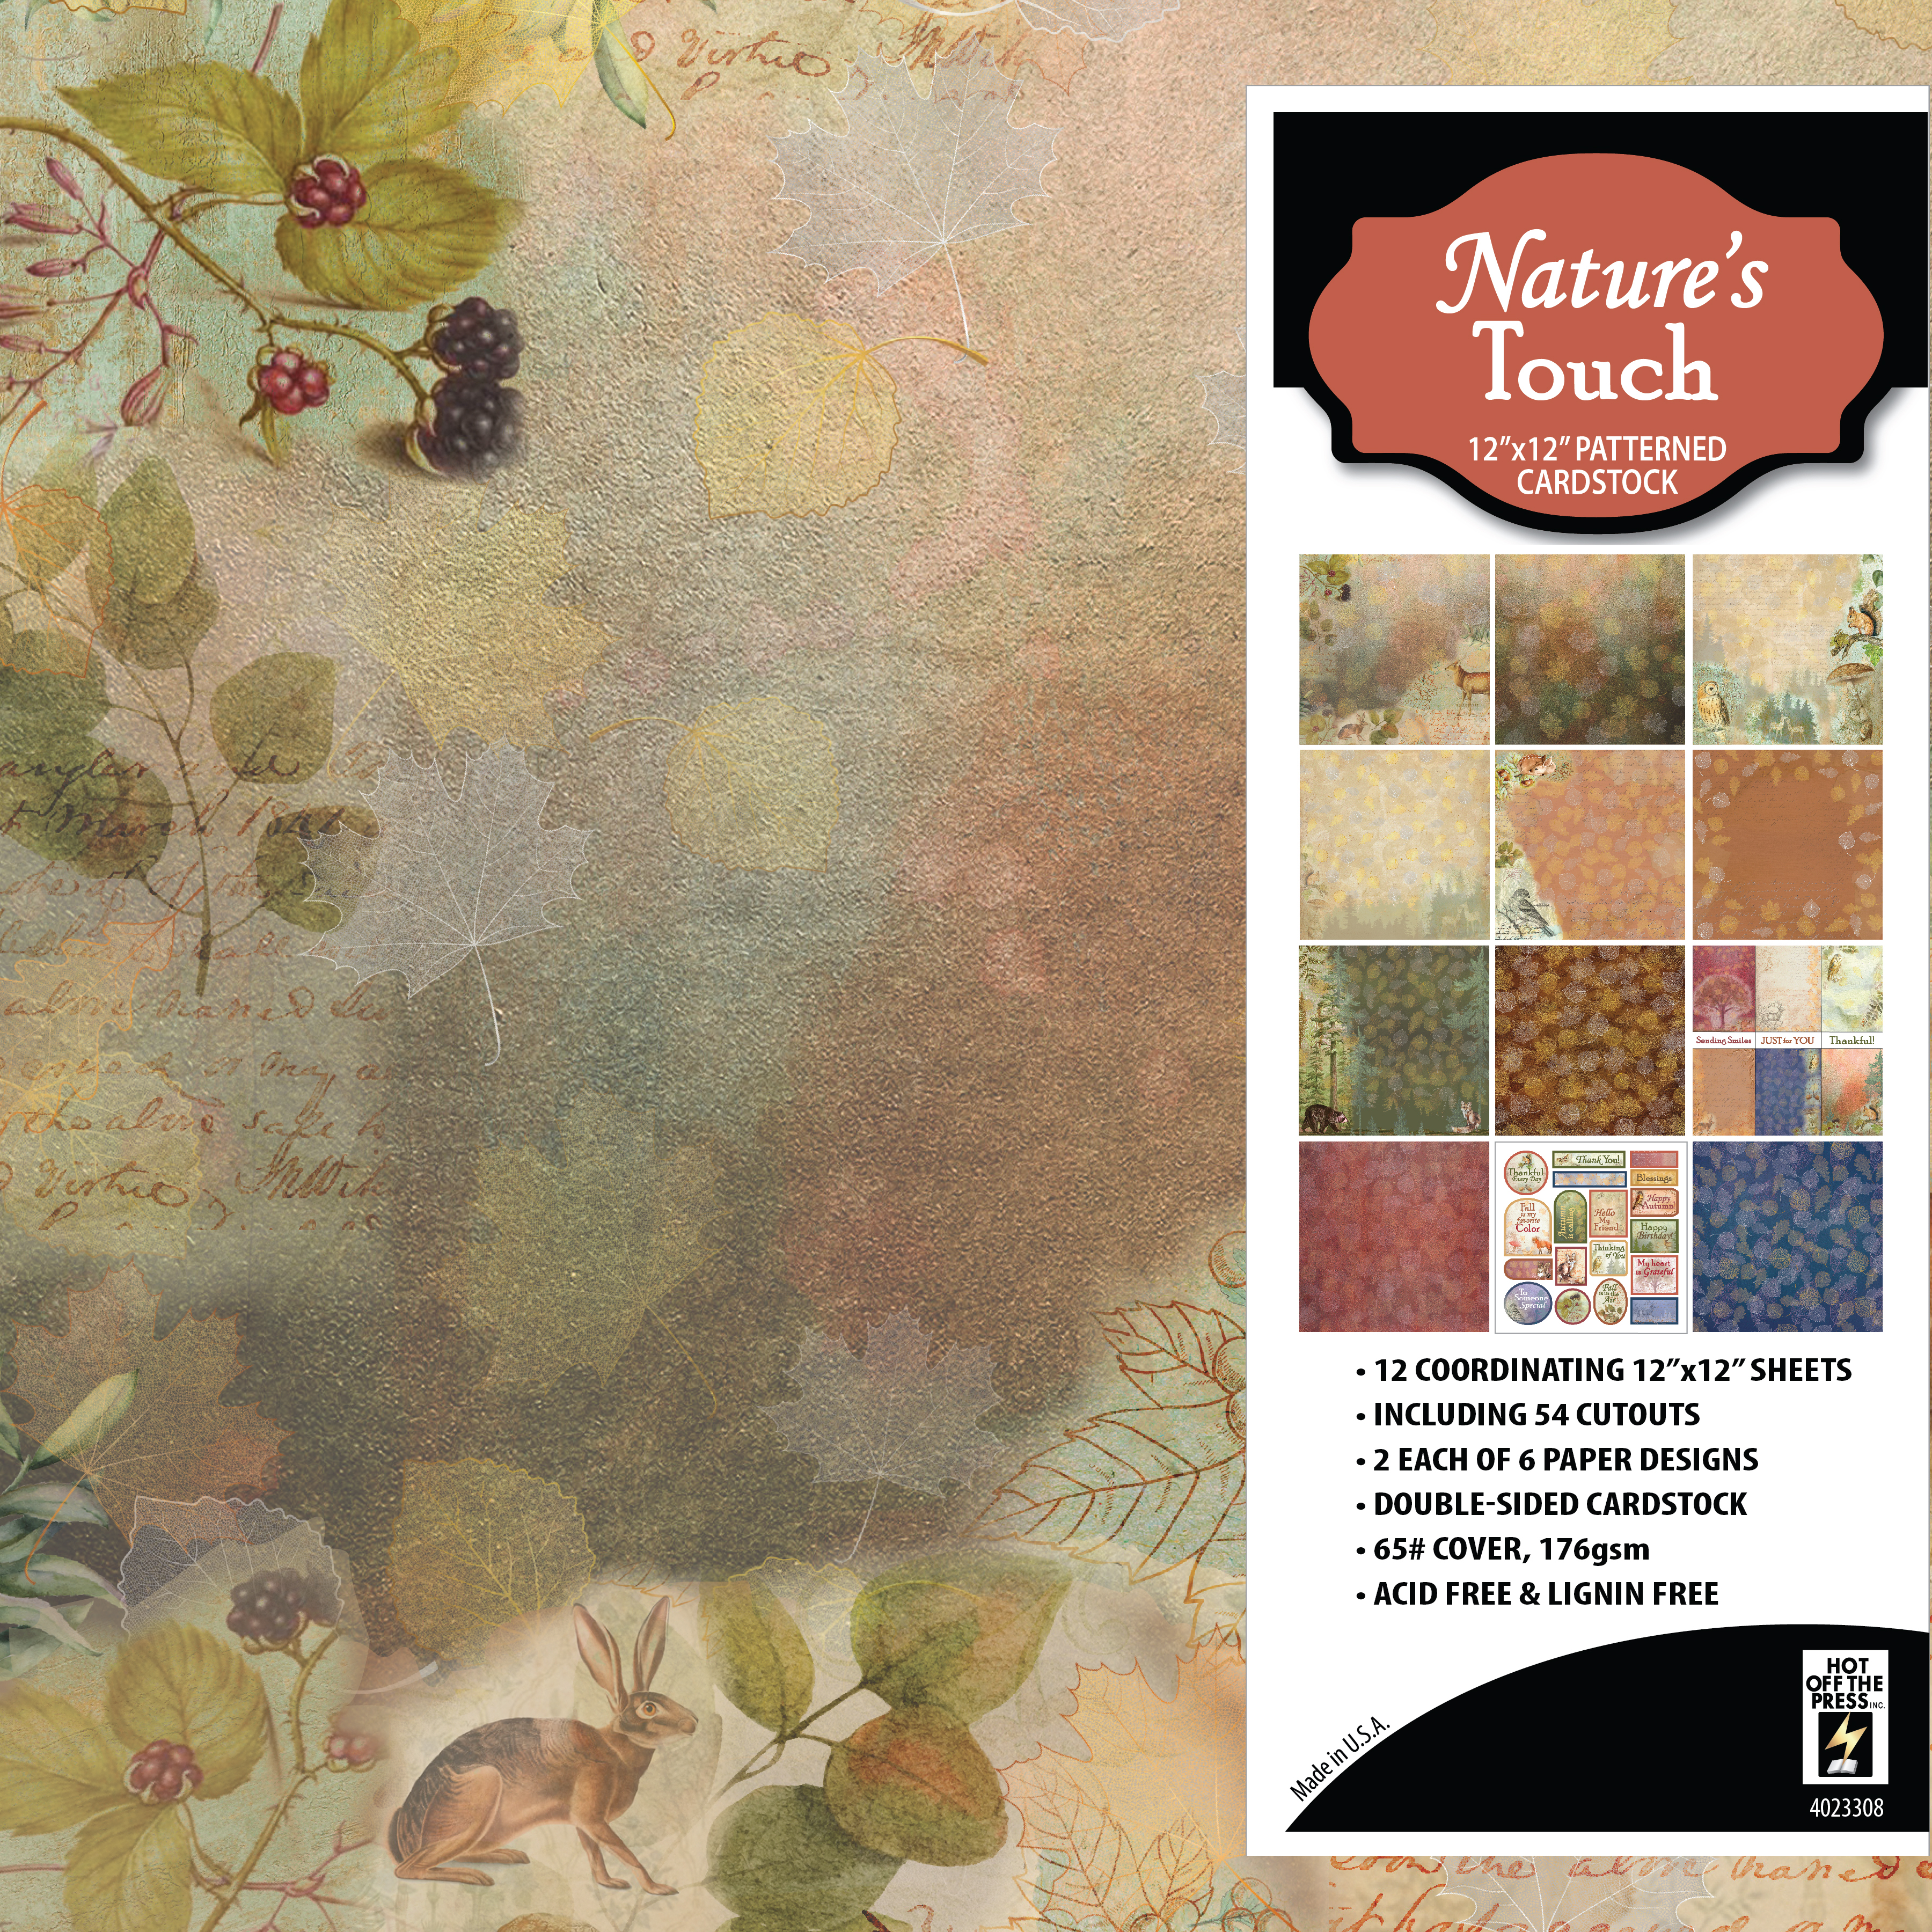 Nature's Touch 12x12 Patterned Cardstock